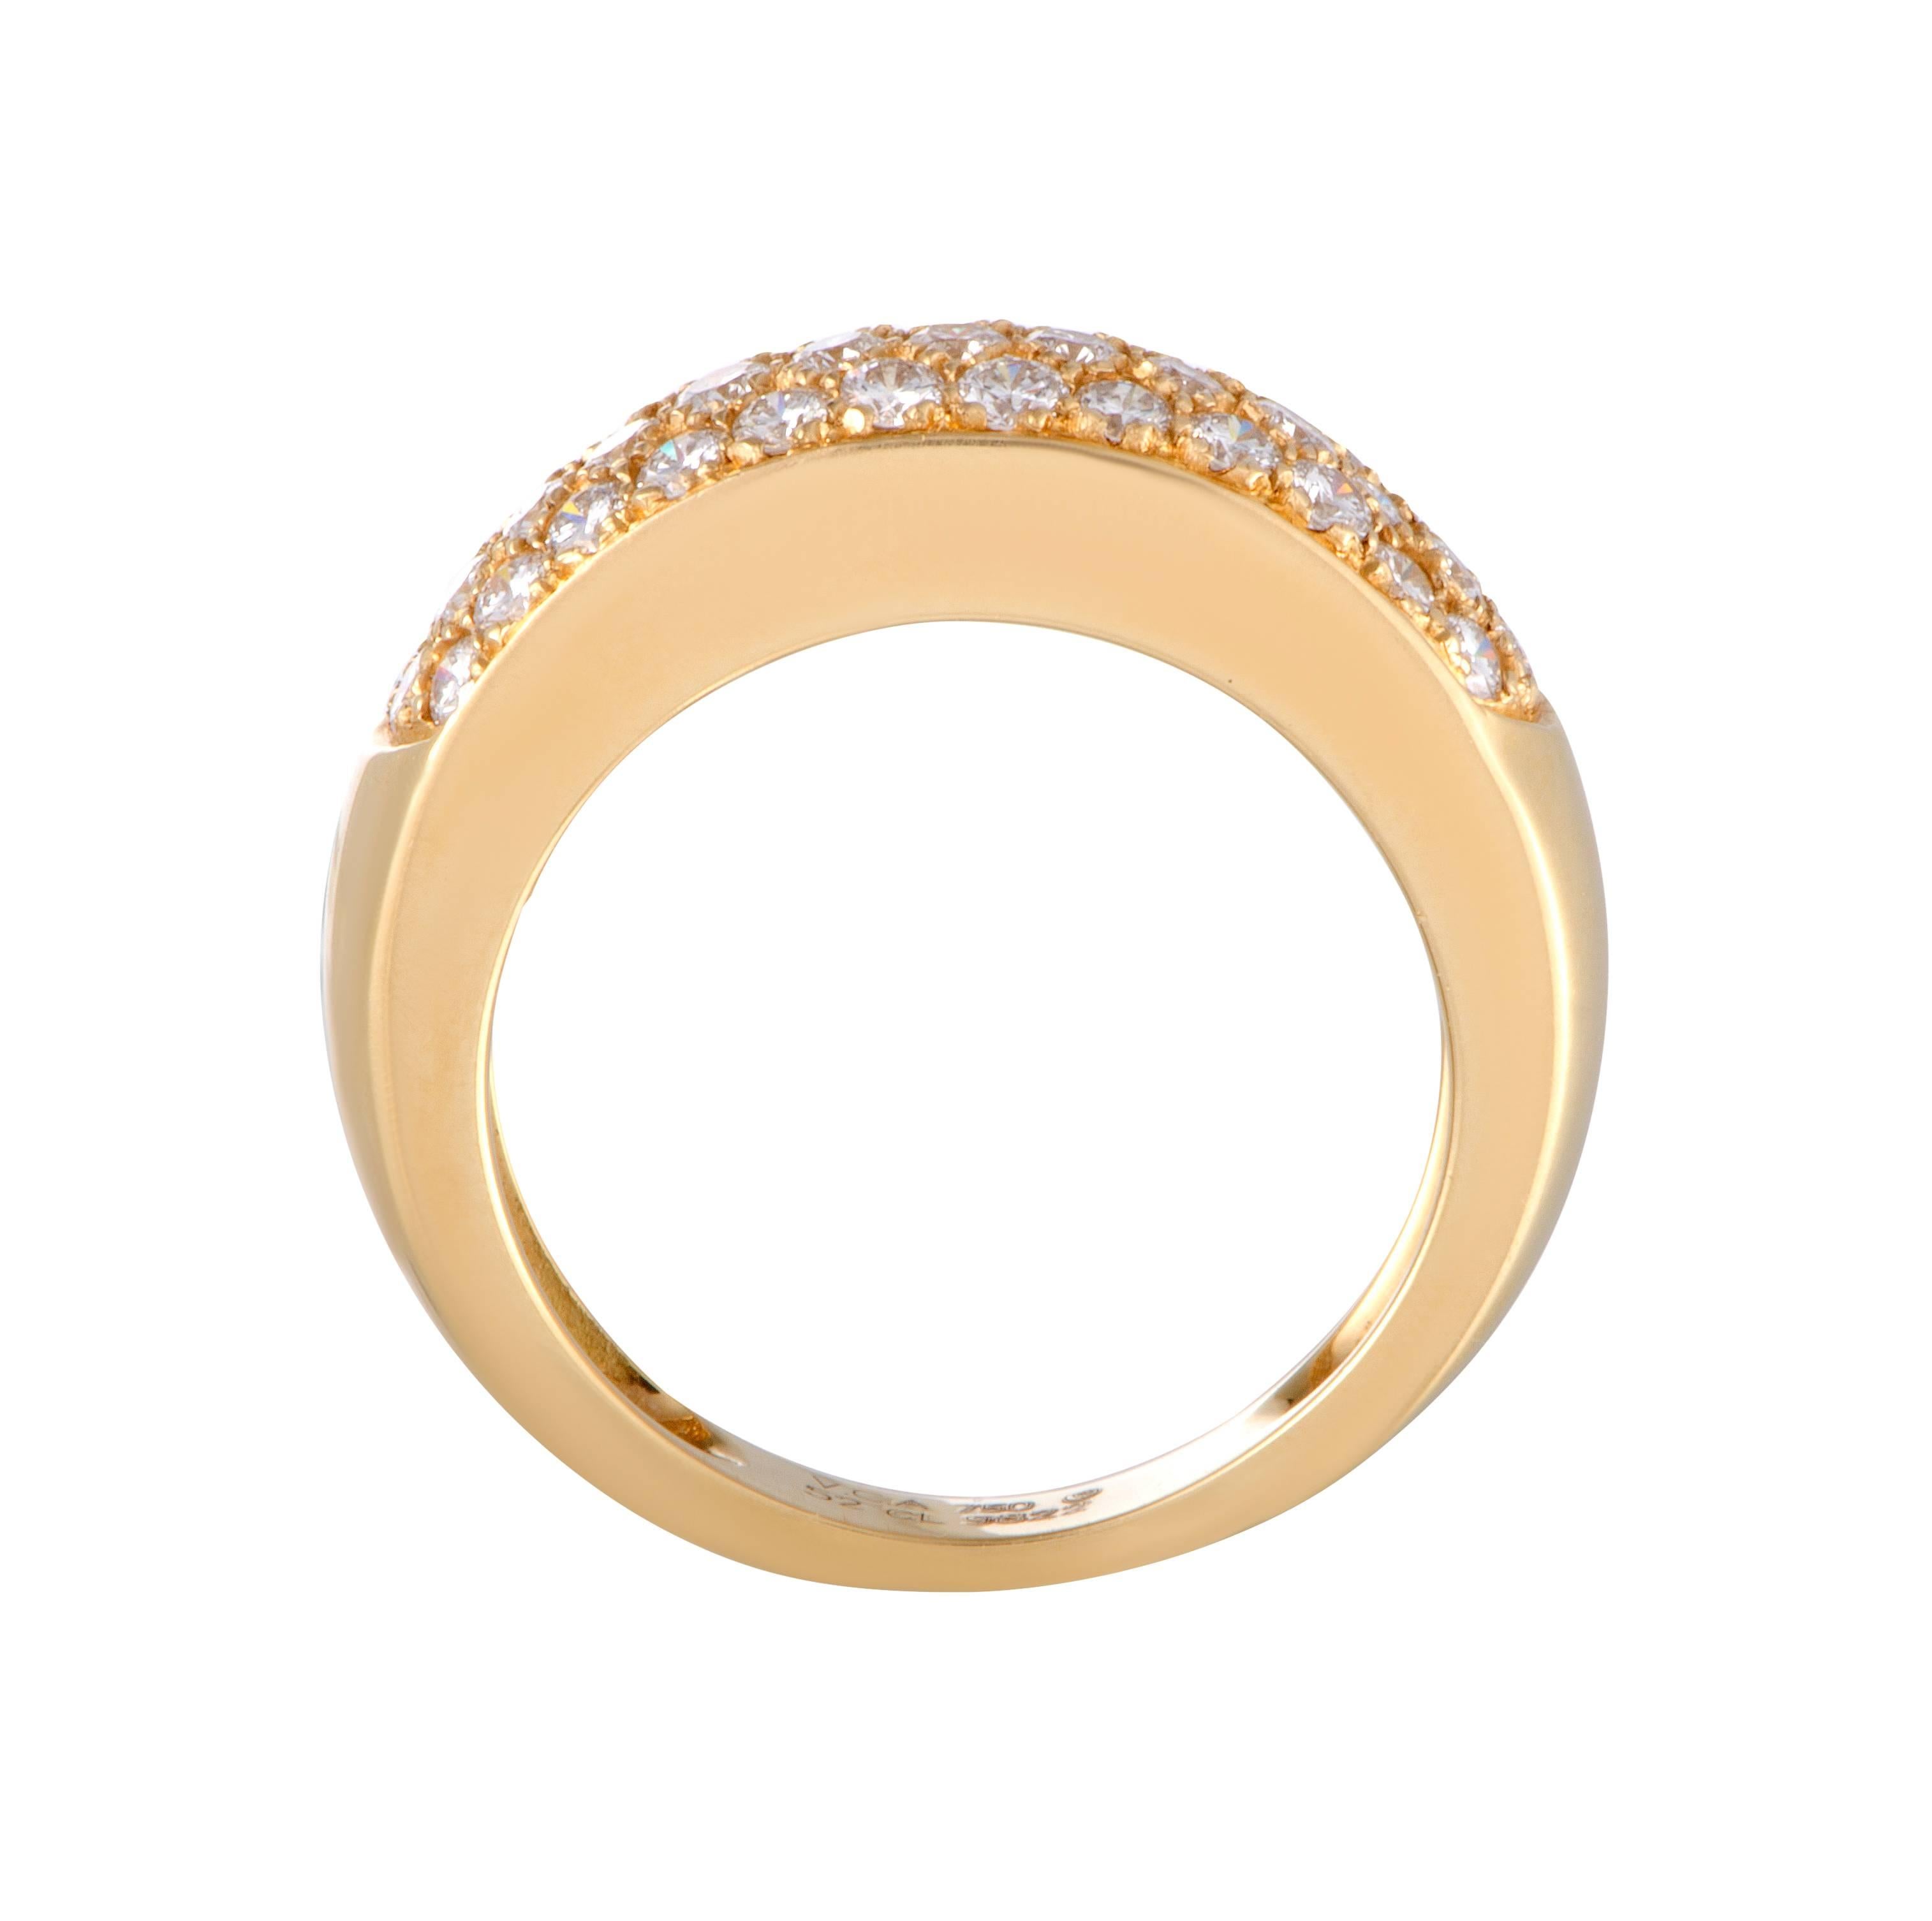 An endearingly subtle design and luxurious diamond décor are combined in this superb Van Cleef & Arpels ring into creating a piece of exceptional aesthetic value. The ring is made of classy 18K yellow gold and expertly set with scintillating